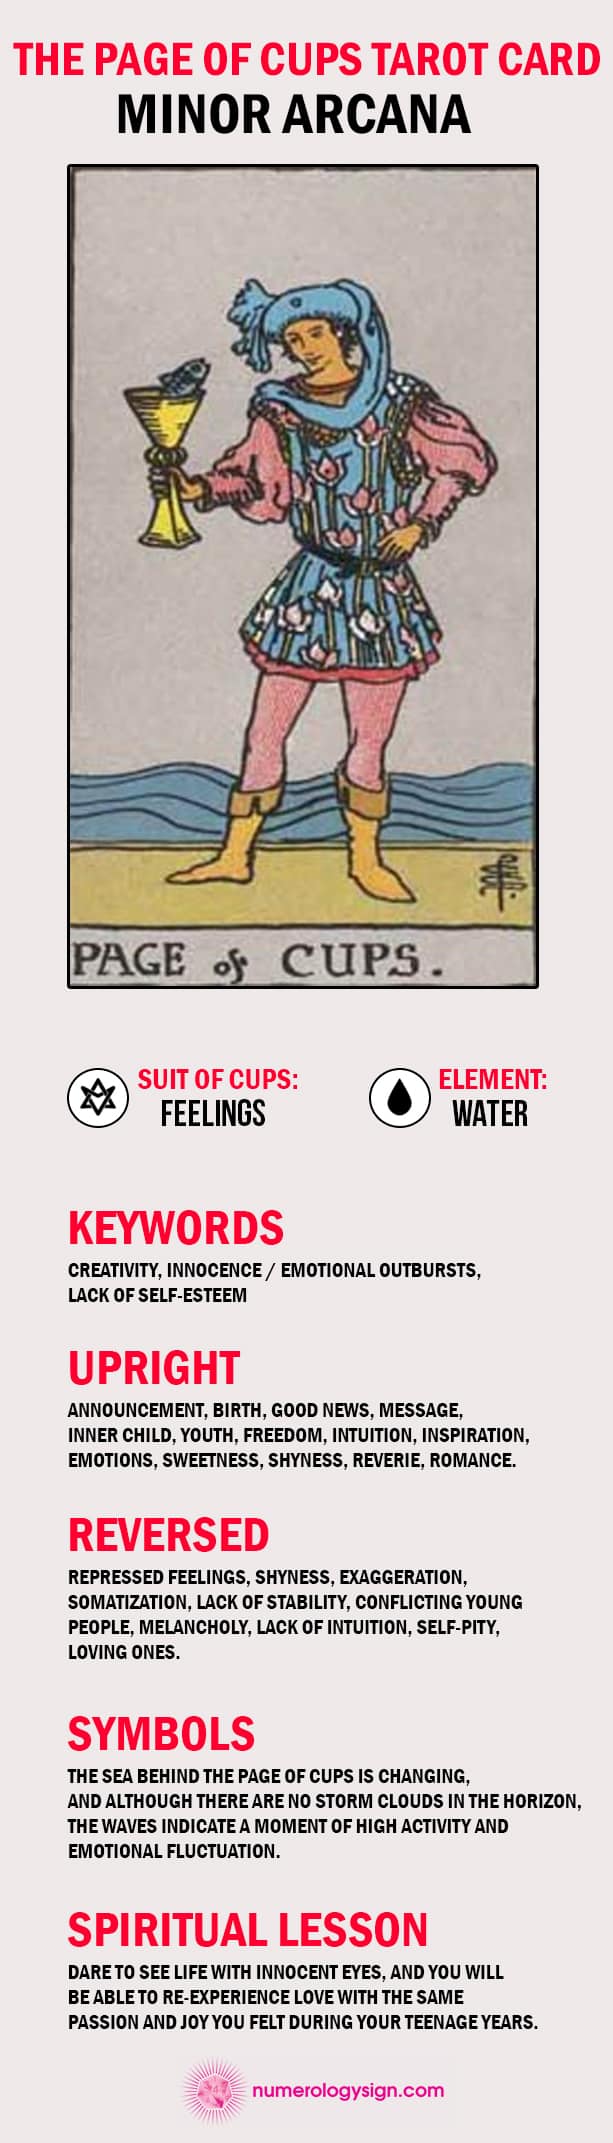 The Page of Cups Tarot Card Meaning Infographic - Minor Arcana